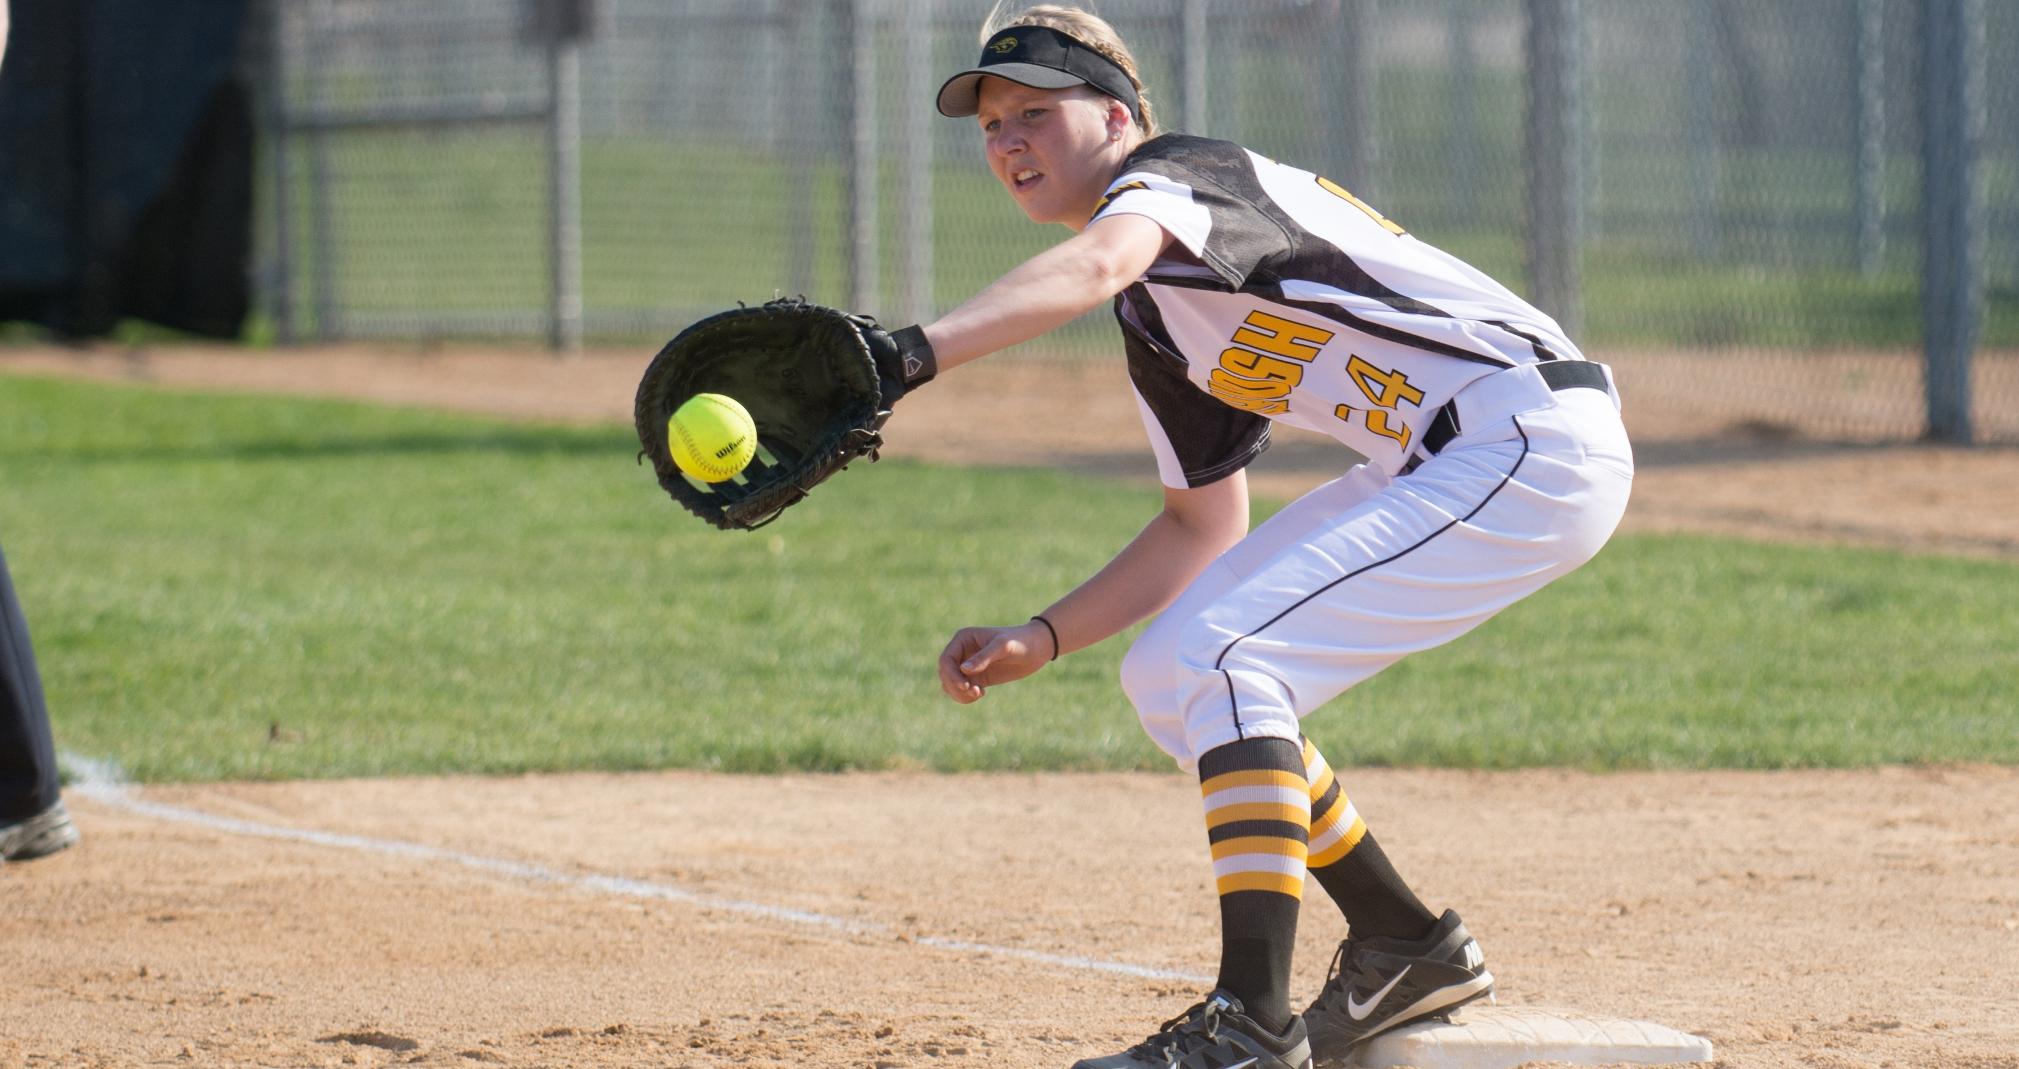 Lindsay Luedke had 13 putouts in the doubleheader with the Tommies, including 10 in the second game.